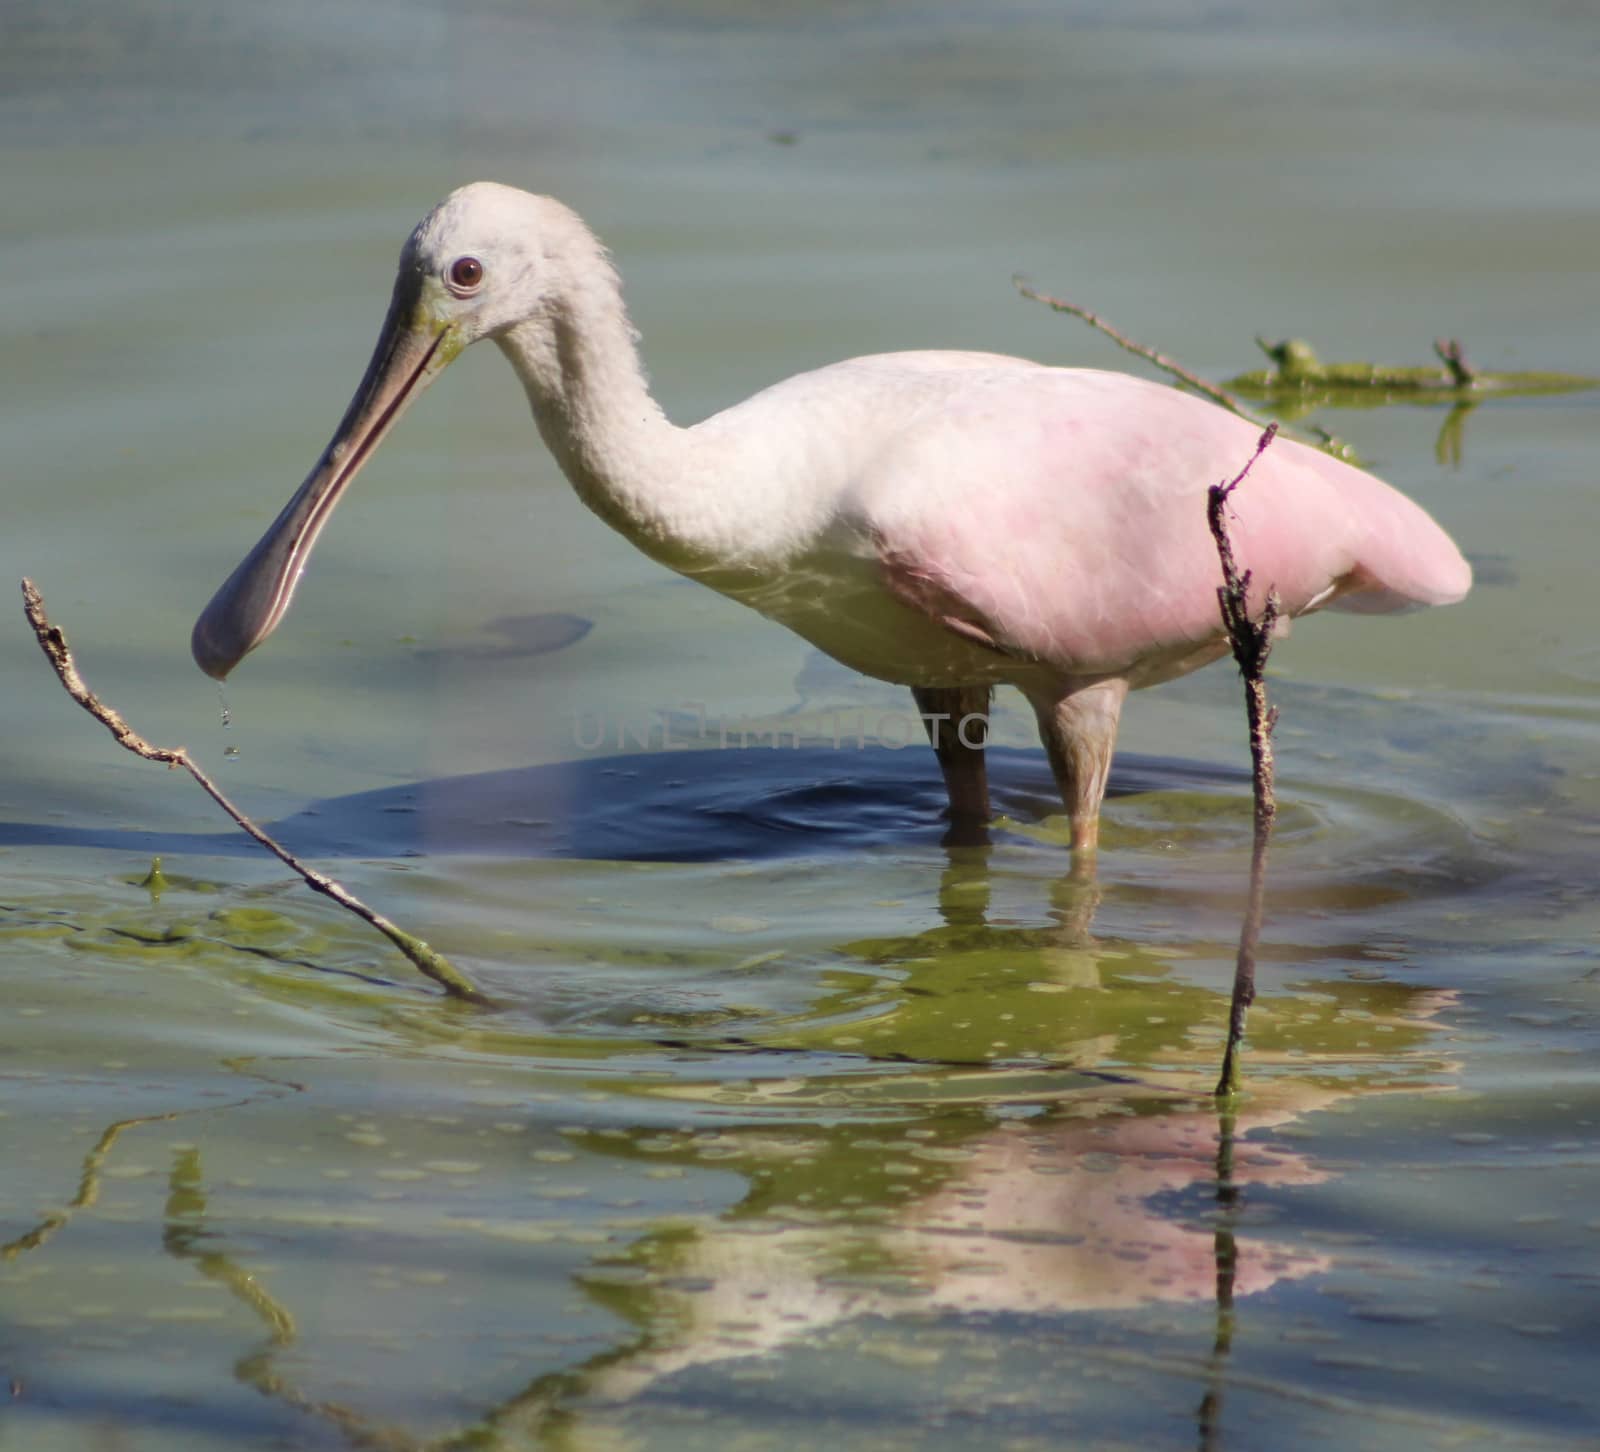 Roseate Spoonbill in a Pond by mpk1970